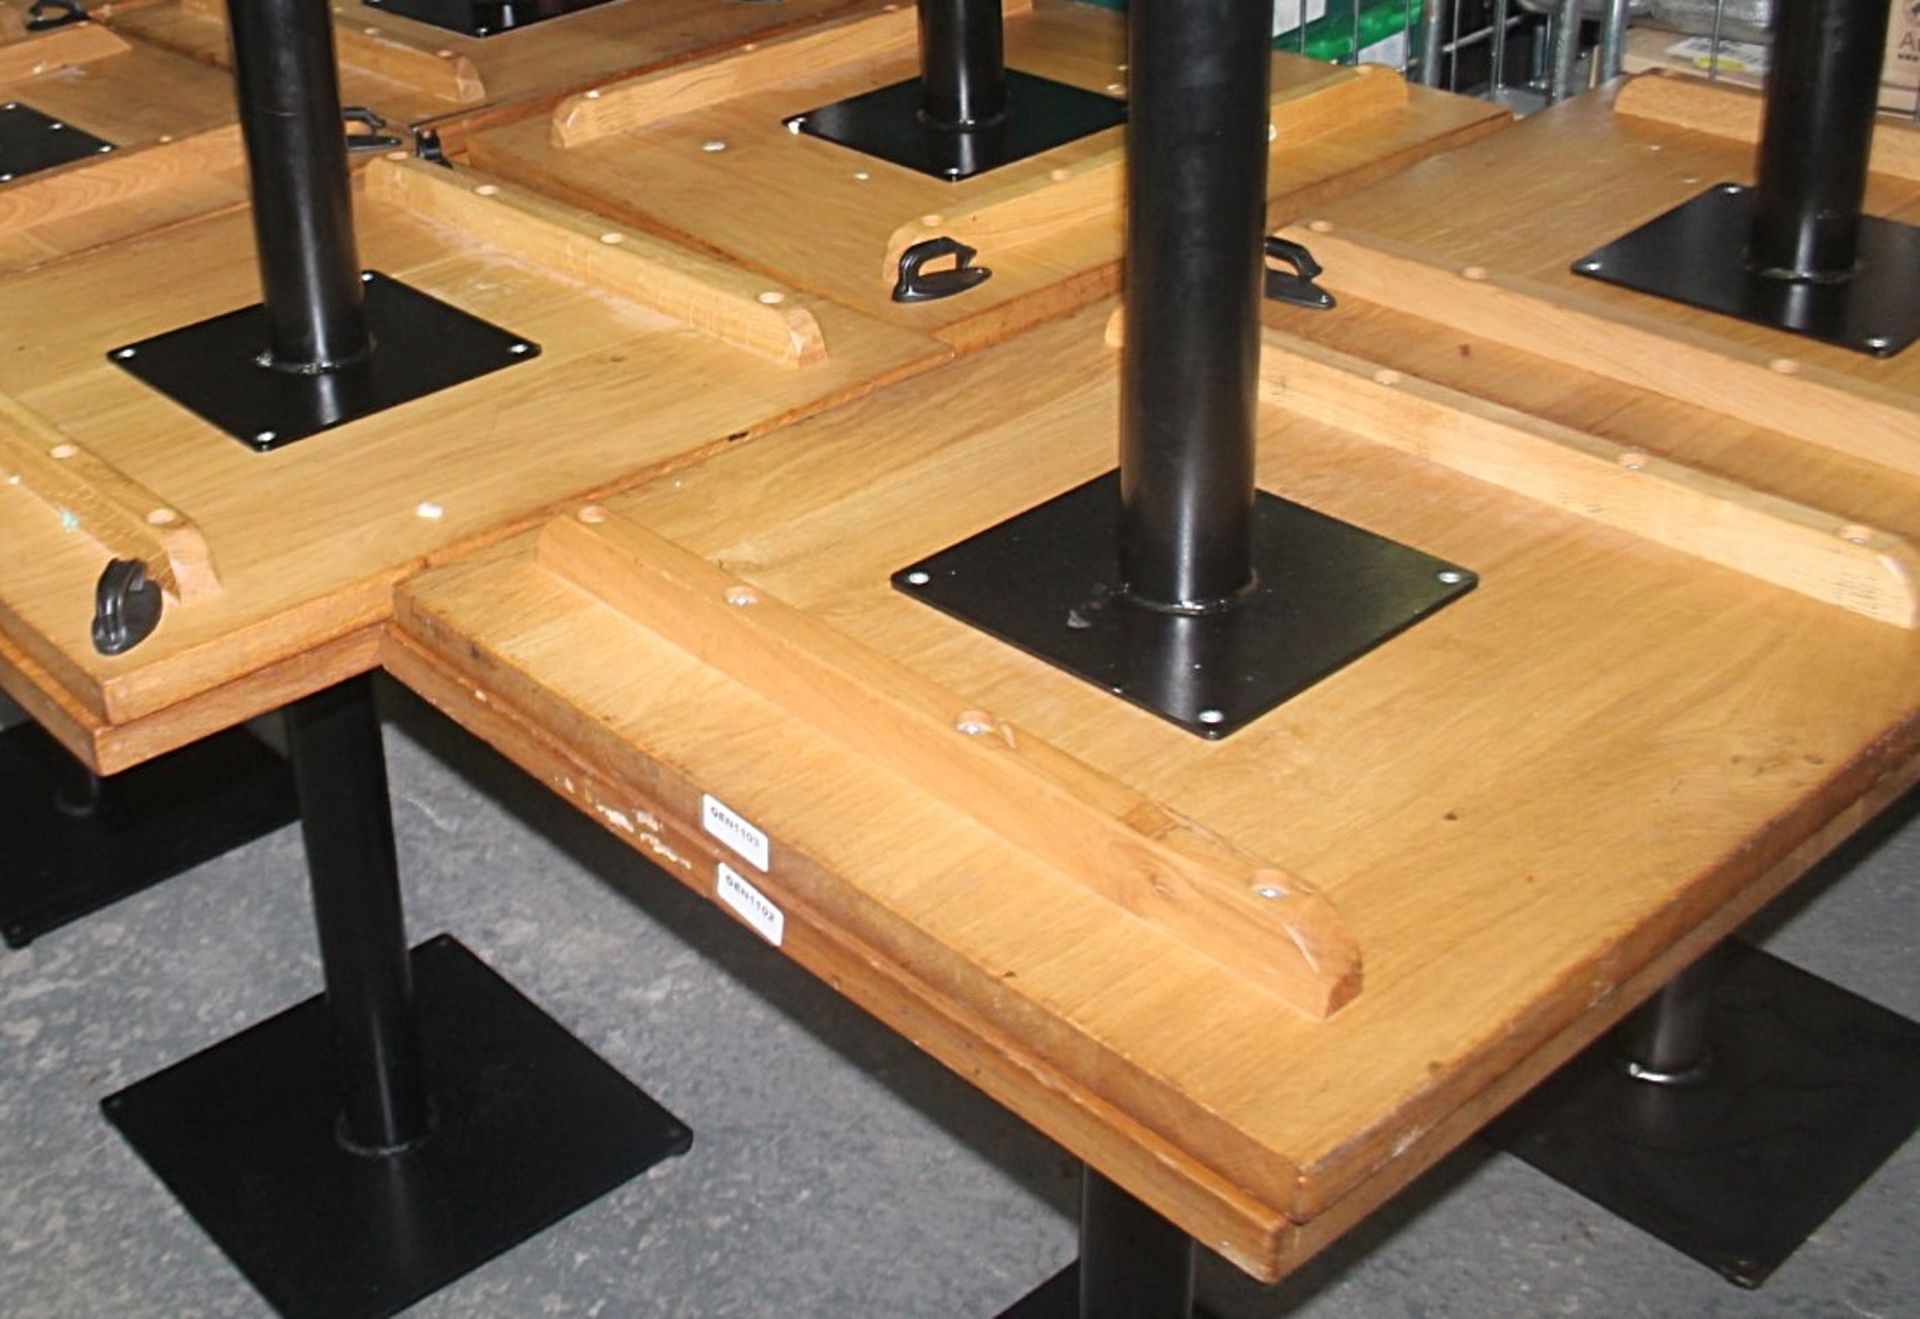 4 x Solid Oak Restaurant Dining Tables - Natural Rustic Knotty Oak Tops With Black Cast Iron Bases - Image 4 of 4